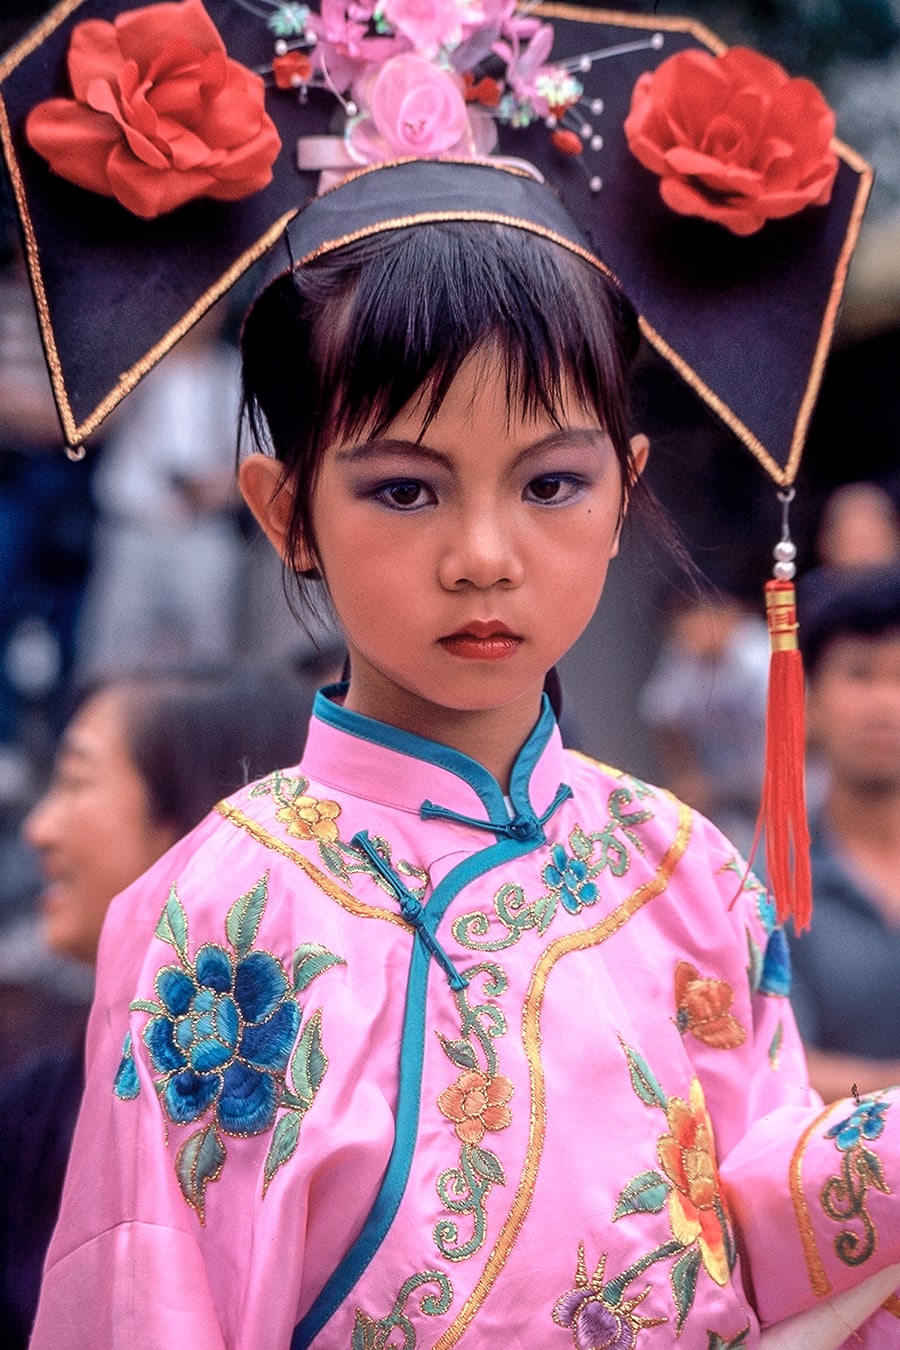 Children dressed in costume at the Bun Festival in Cheung Chau, Hong Kong.